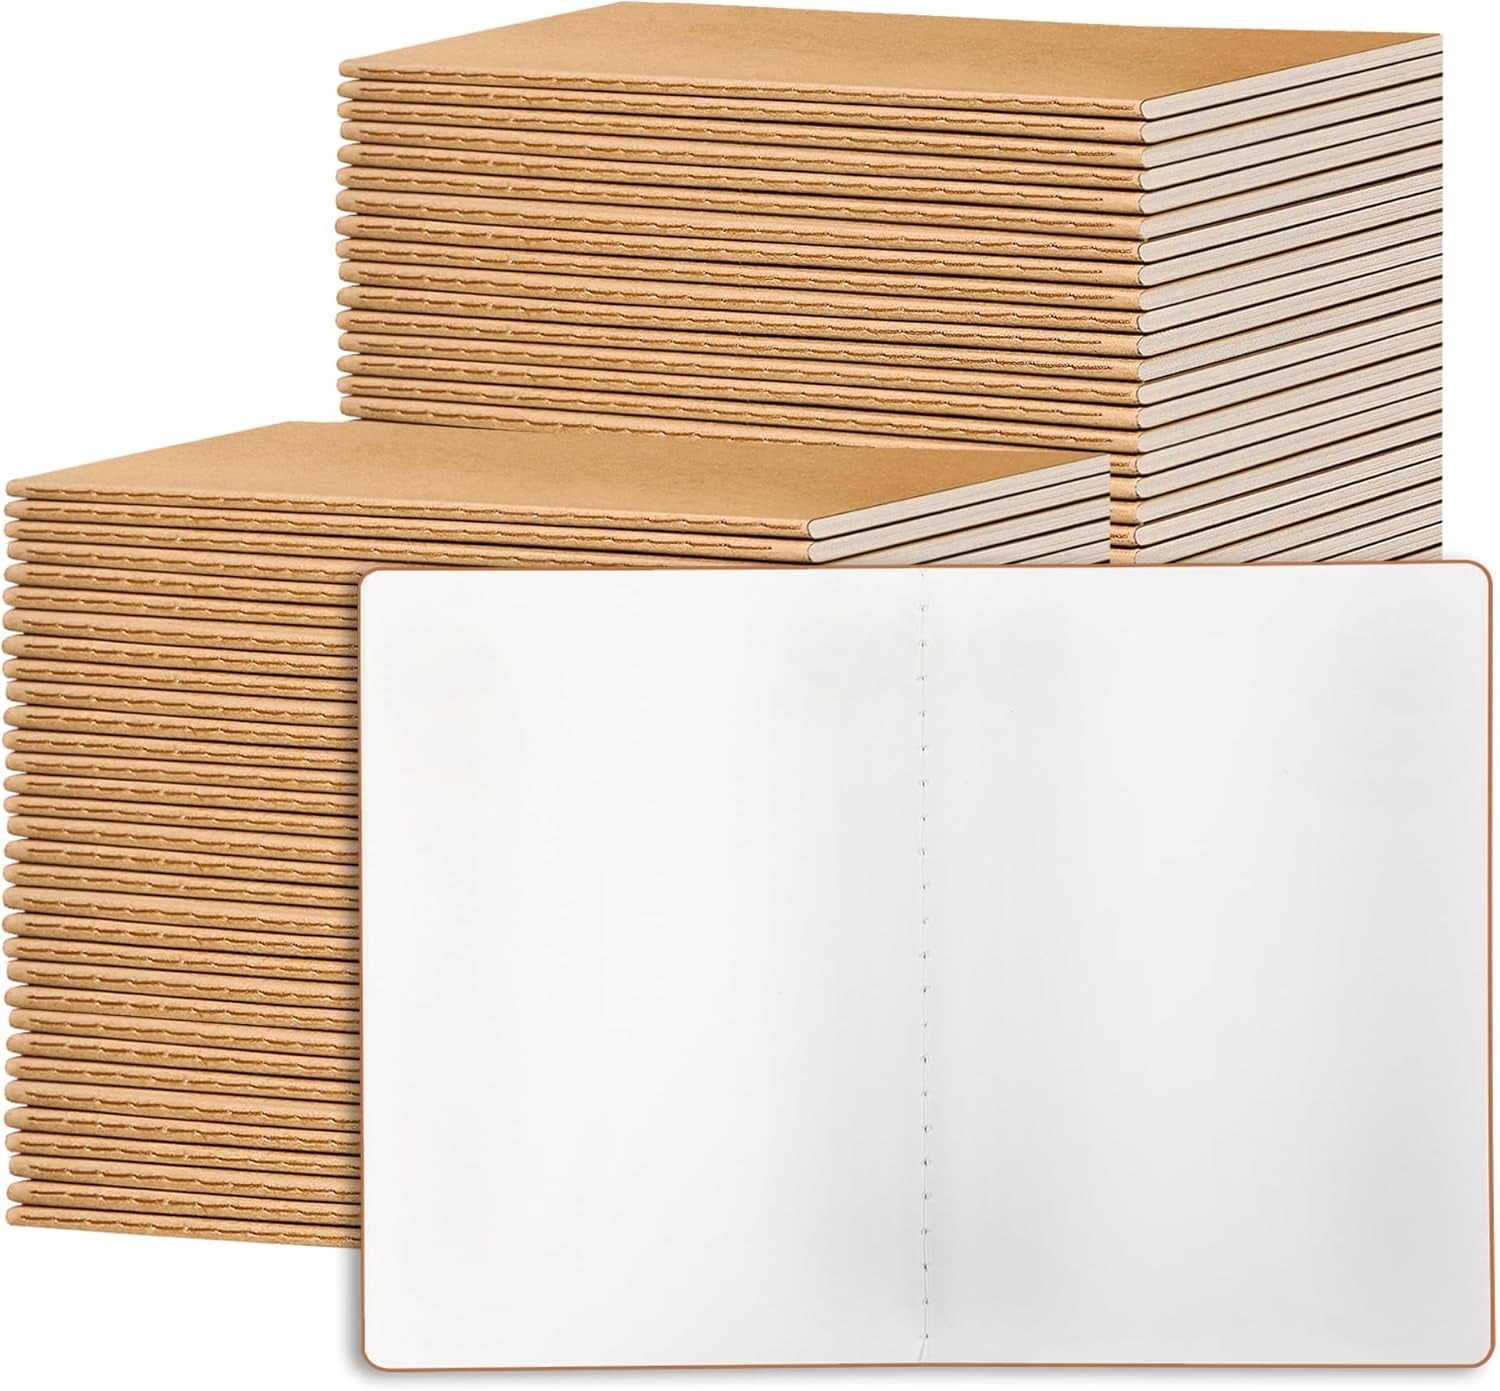 24 Pieces Blank Kraft Notebooks, 8.3X5.5 Inches A5 Small Journals Bulk Blank Notebooks 80 GSM Unlined with 60 Pages for Kids Students School Office Traveler Sketching/Drawing/Writing Supplies,30 Sheets